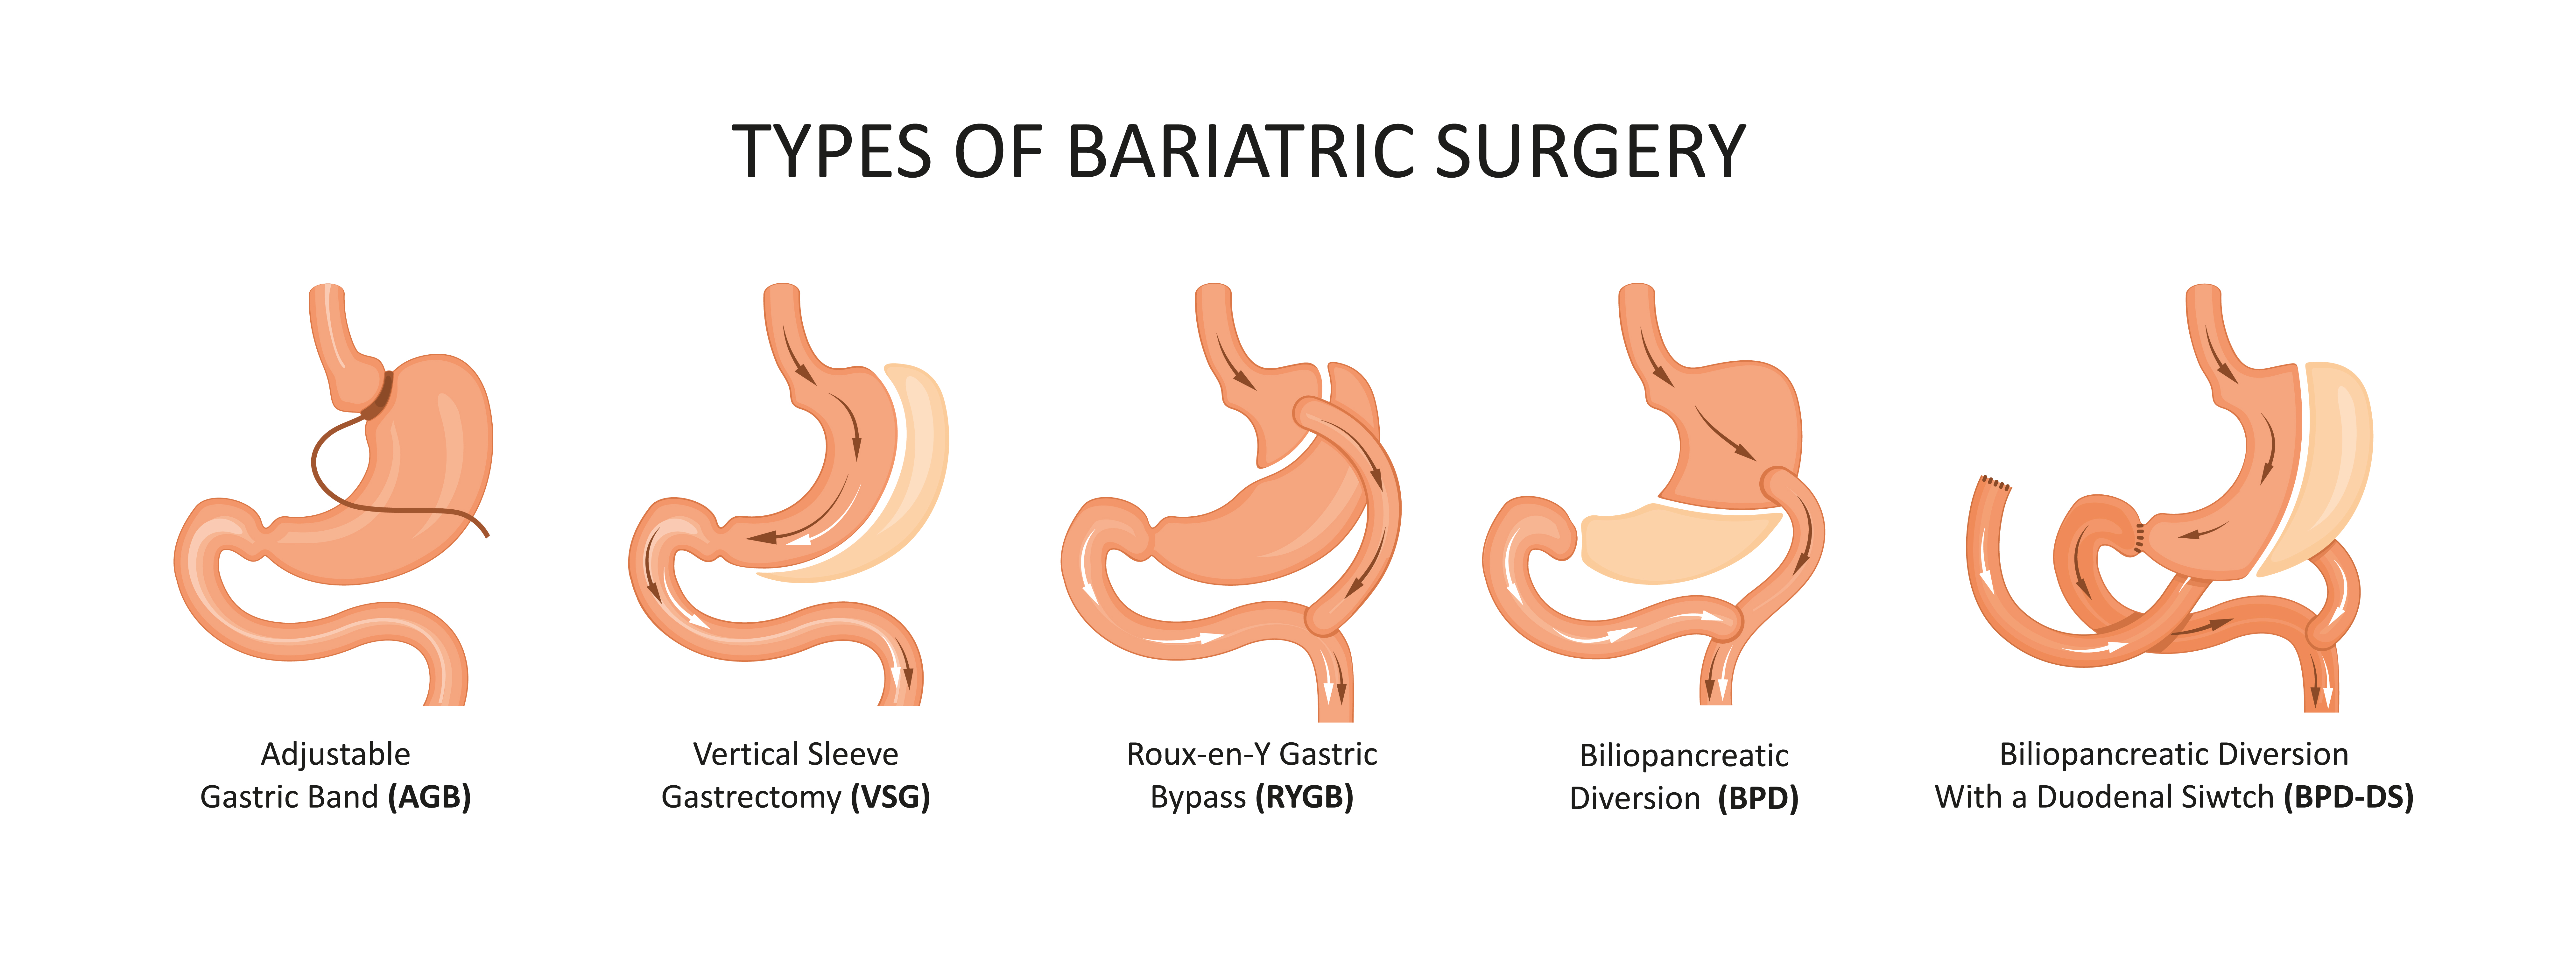 bariatric-surgery-types-and-effects-of-surgery